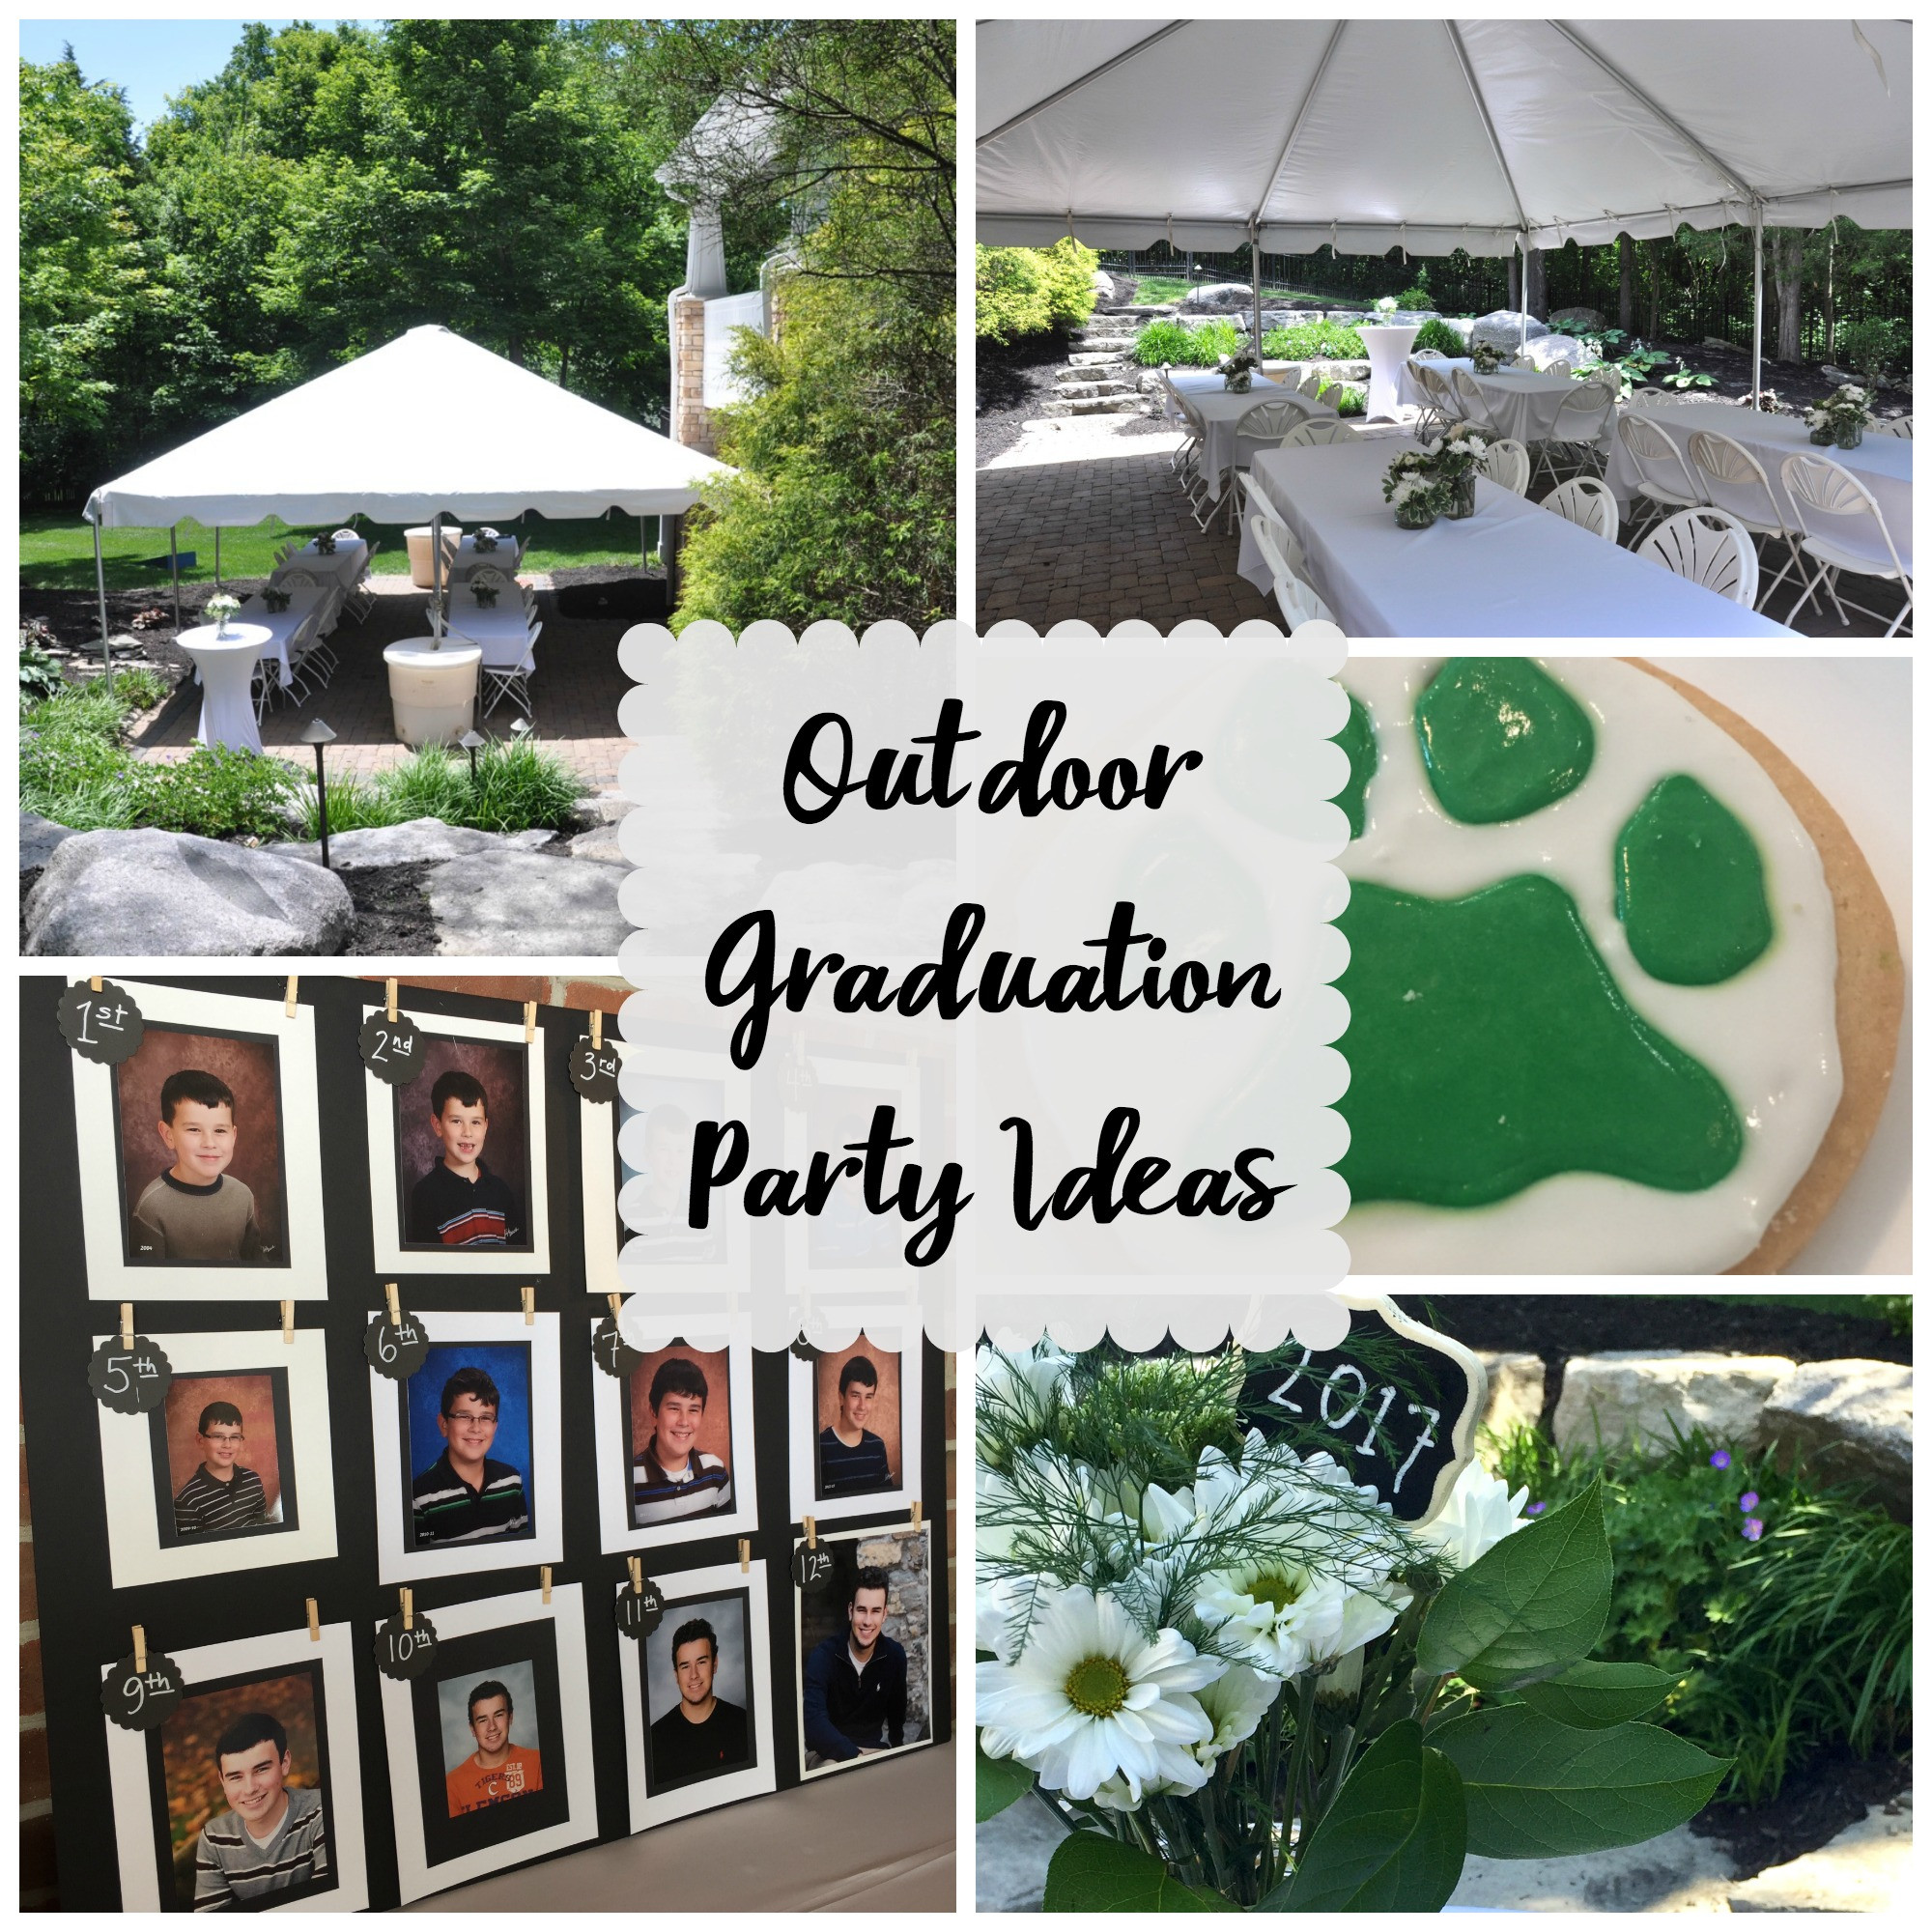 Ideas For Displaying Pictures For Graduation Party
 Outdoor Graduation Party Evolution of Style